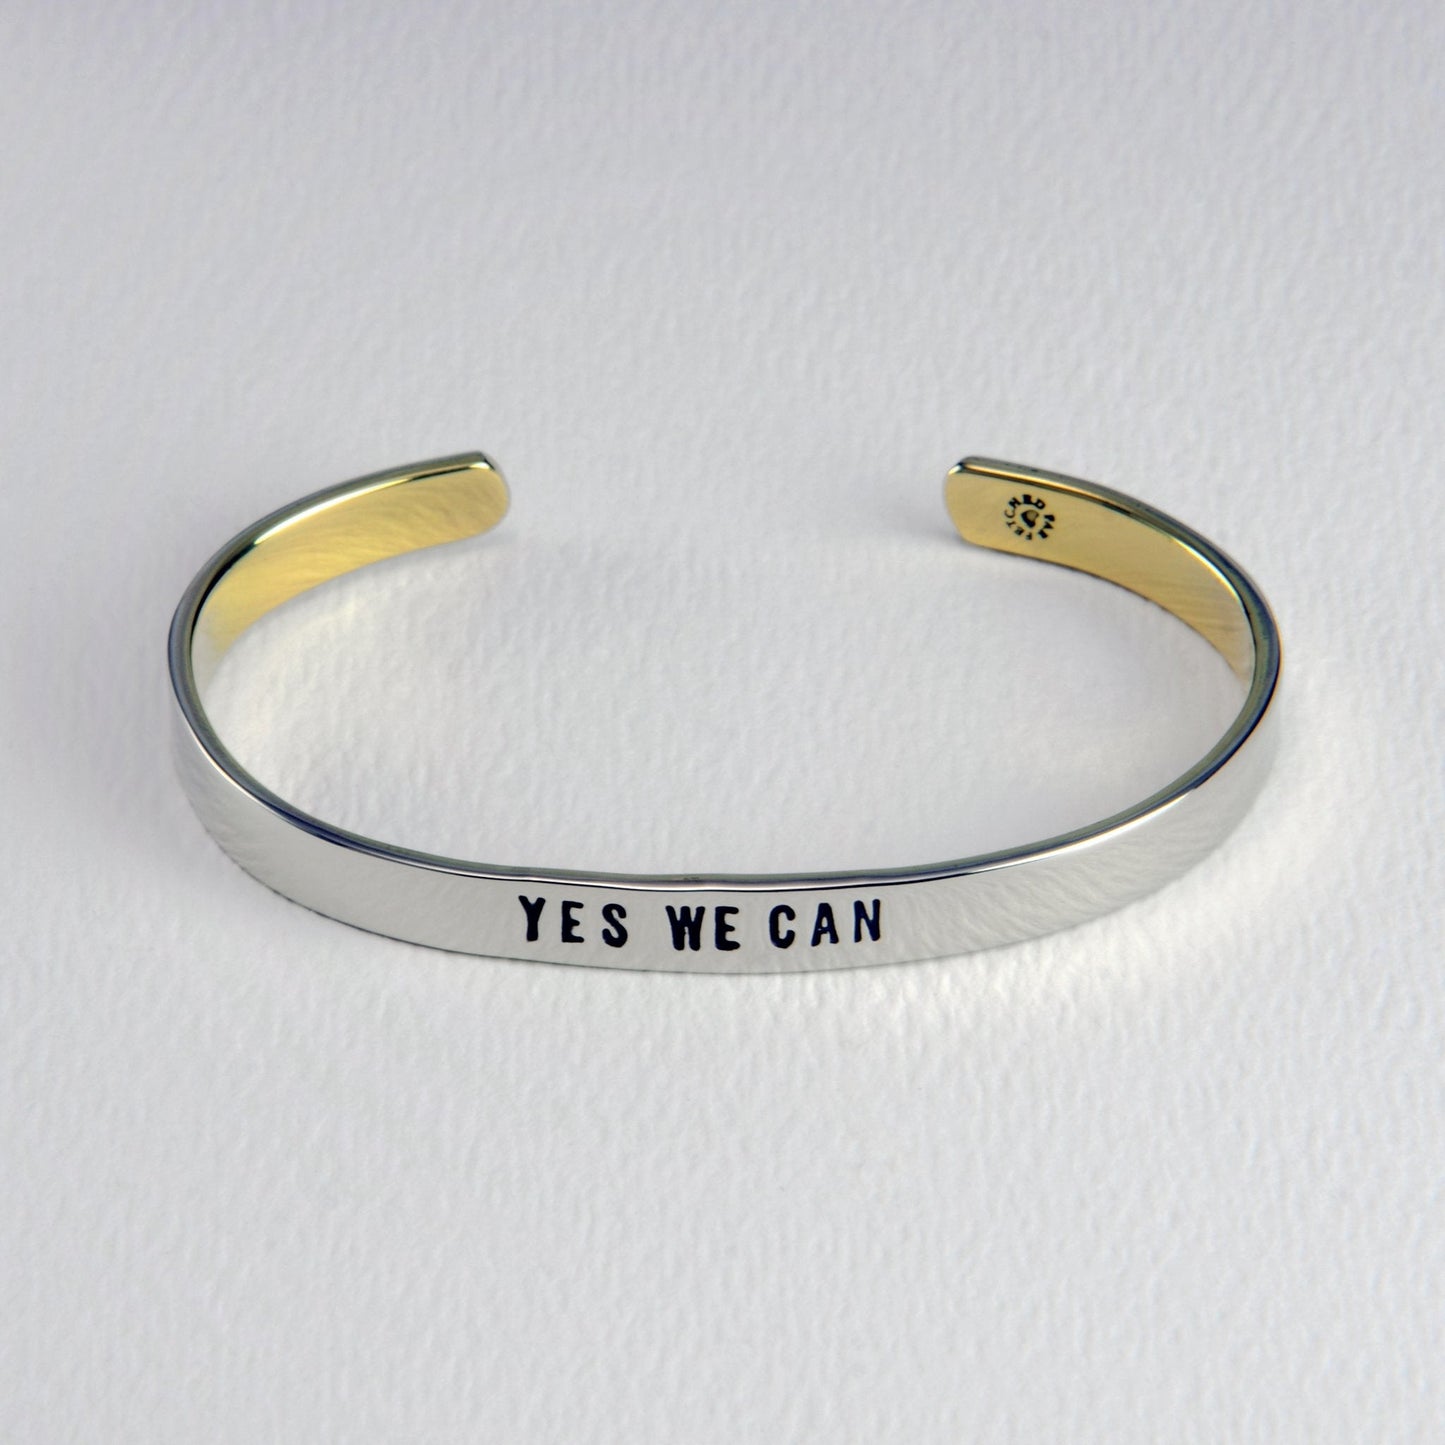 Yes We Can Mixed Metals Cuff Bracelet